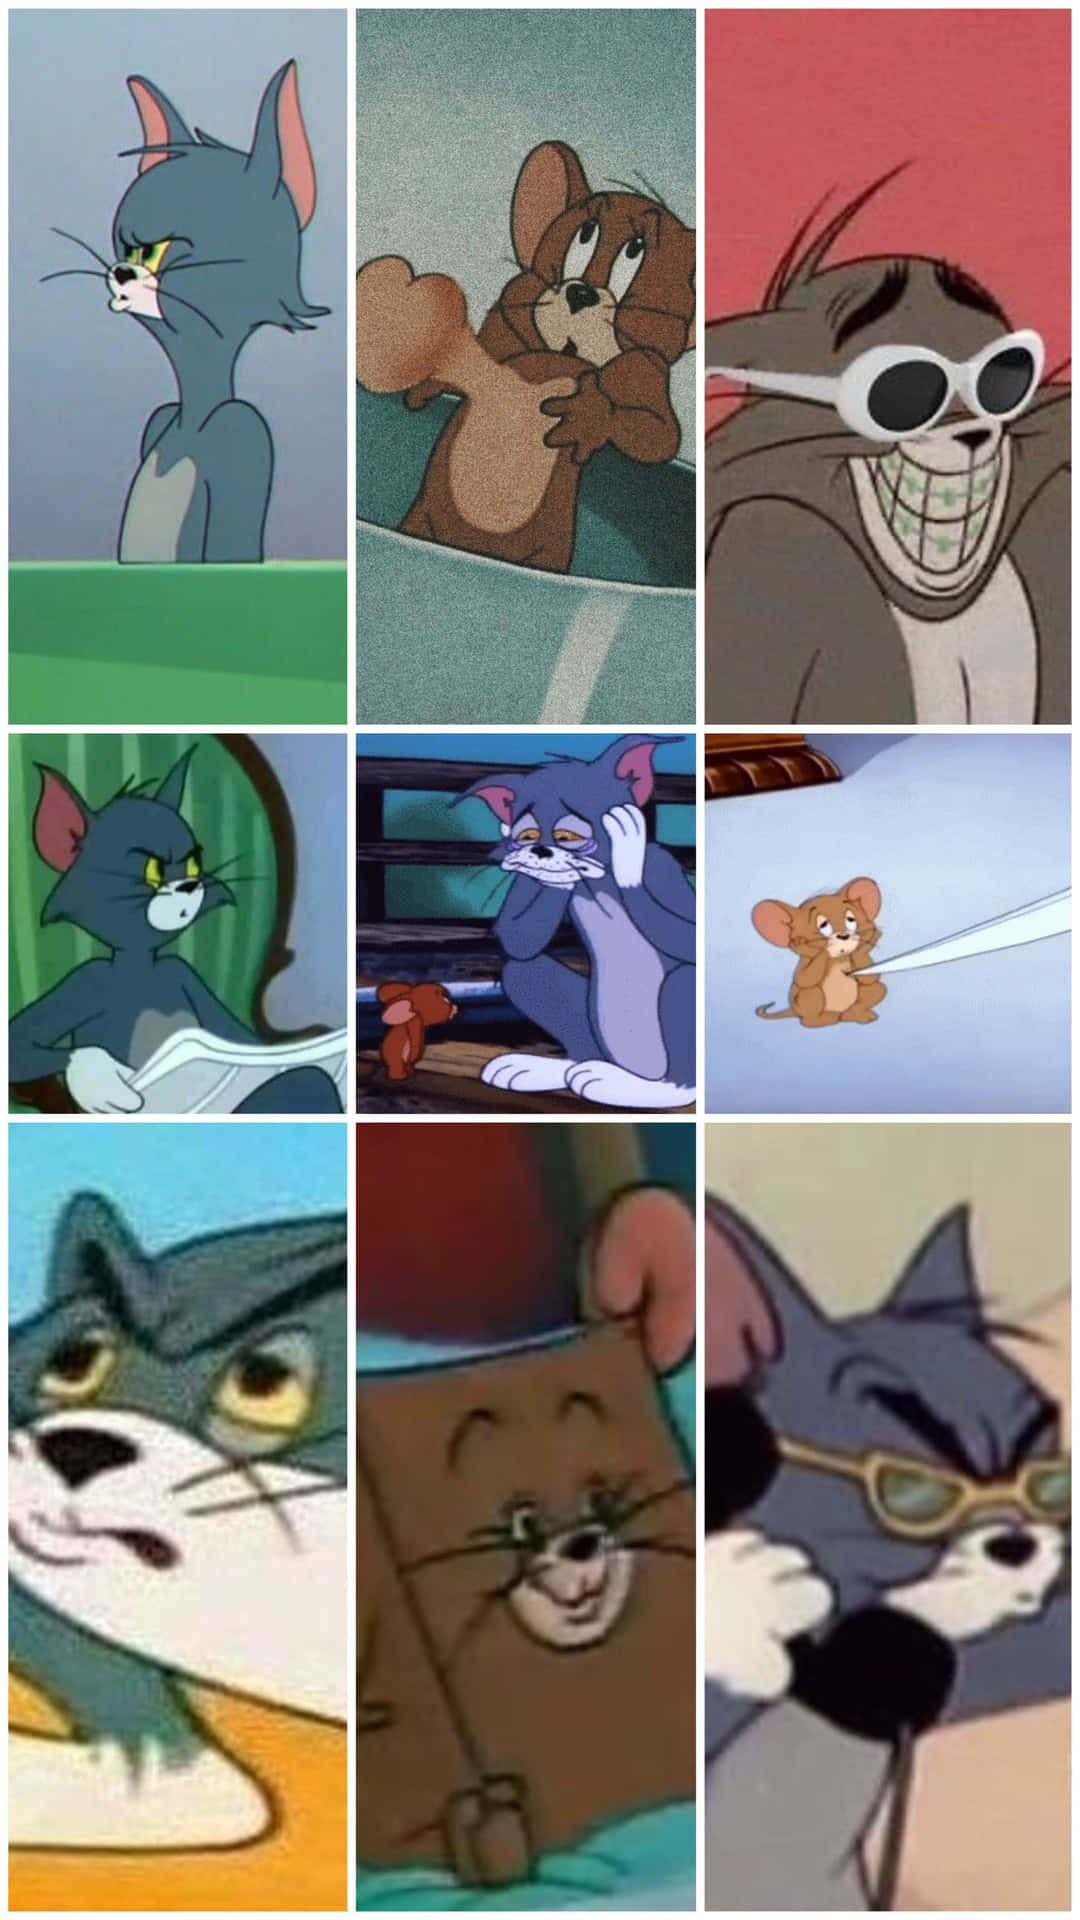 Tom and Jerry Enjoying Some Good Old-Fashioned Fun Wallpaper